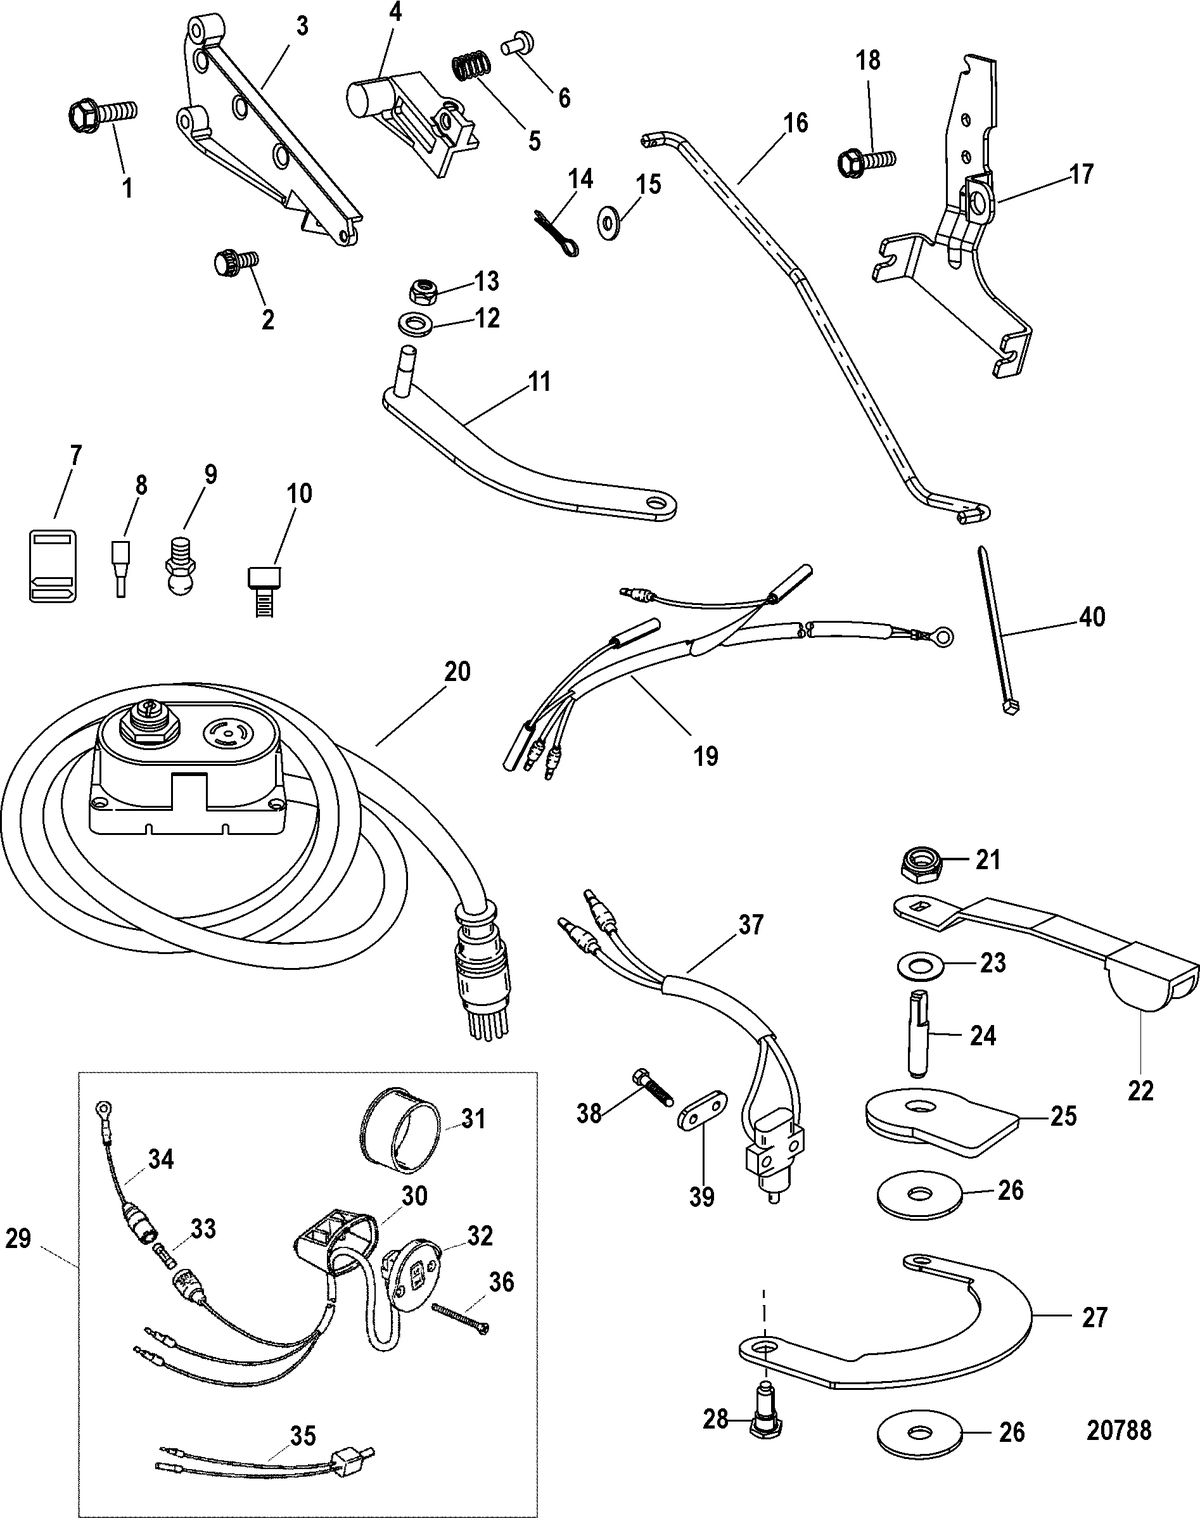 ACCESSORIES STEERING SYSTEMS AND COMPONENTS Tiller Handle Kit Components(880095A03 /A04)